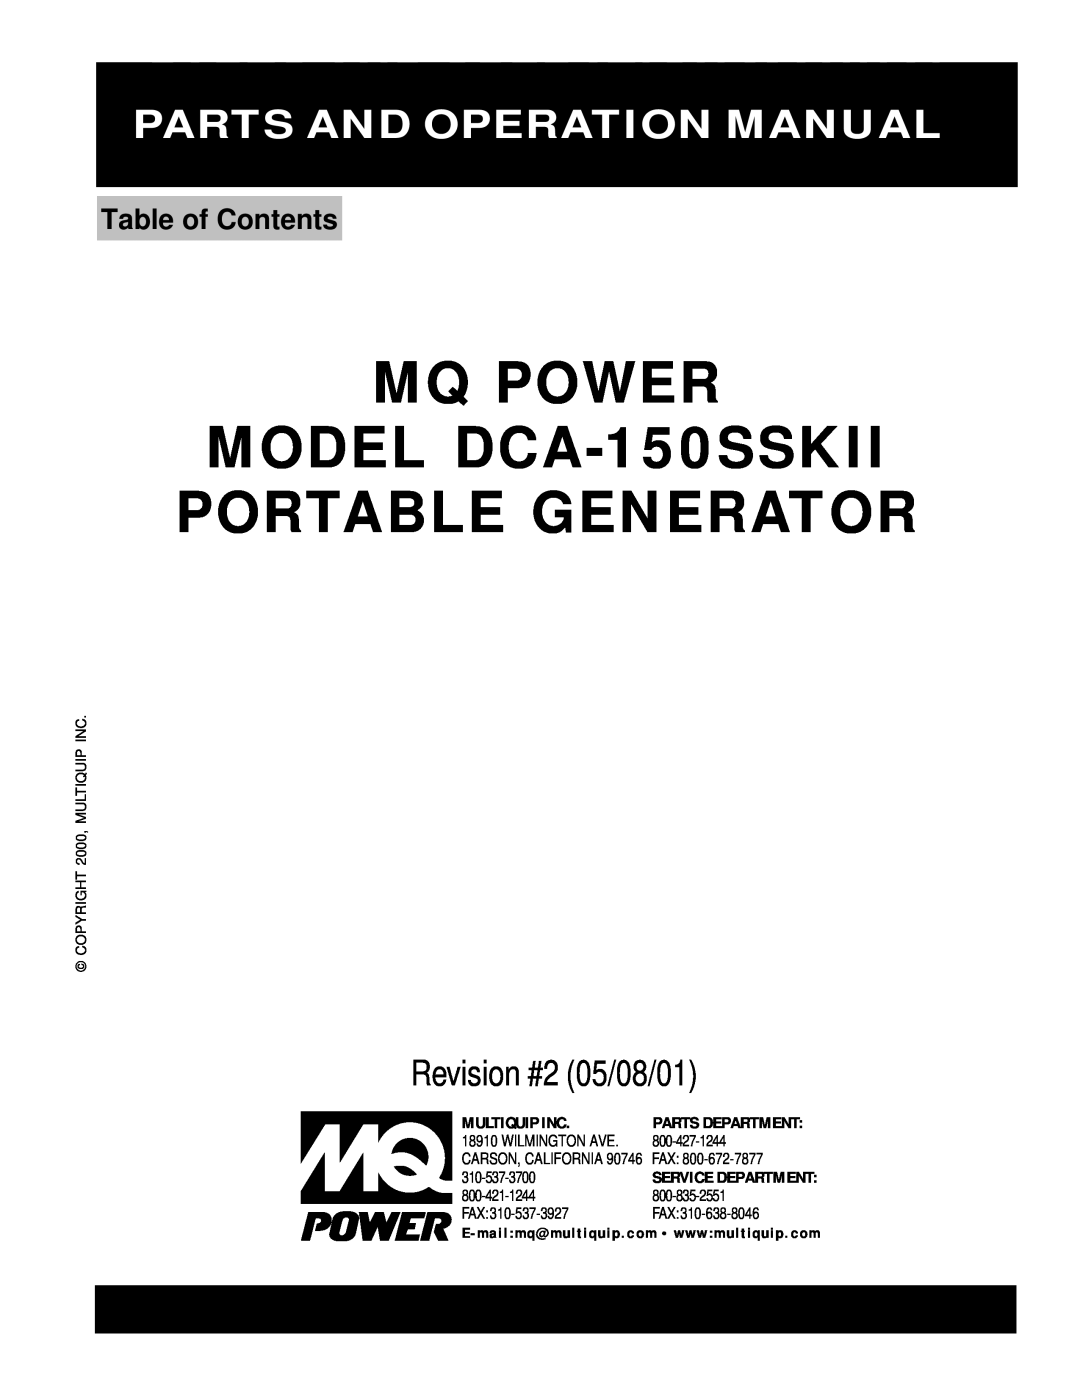 Multiquip operation manual MQ POWER MODEL DCA-150SSKII PORTABLE GENERATOR, Table of Contents, Revision #2 05/08/01 